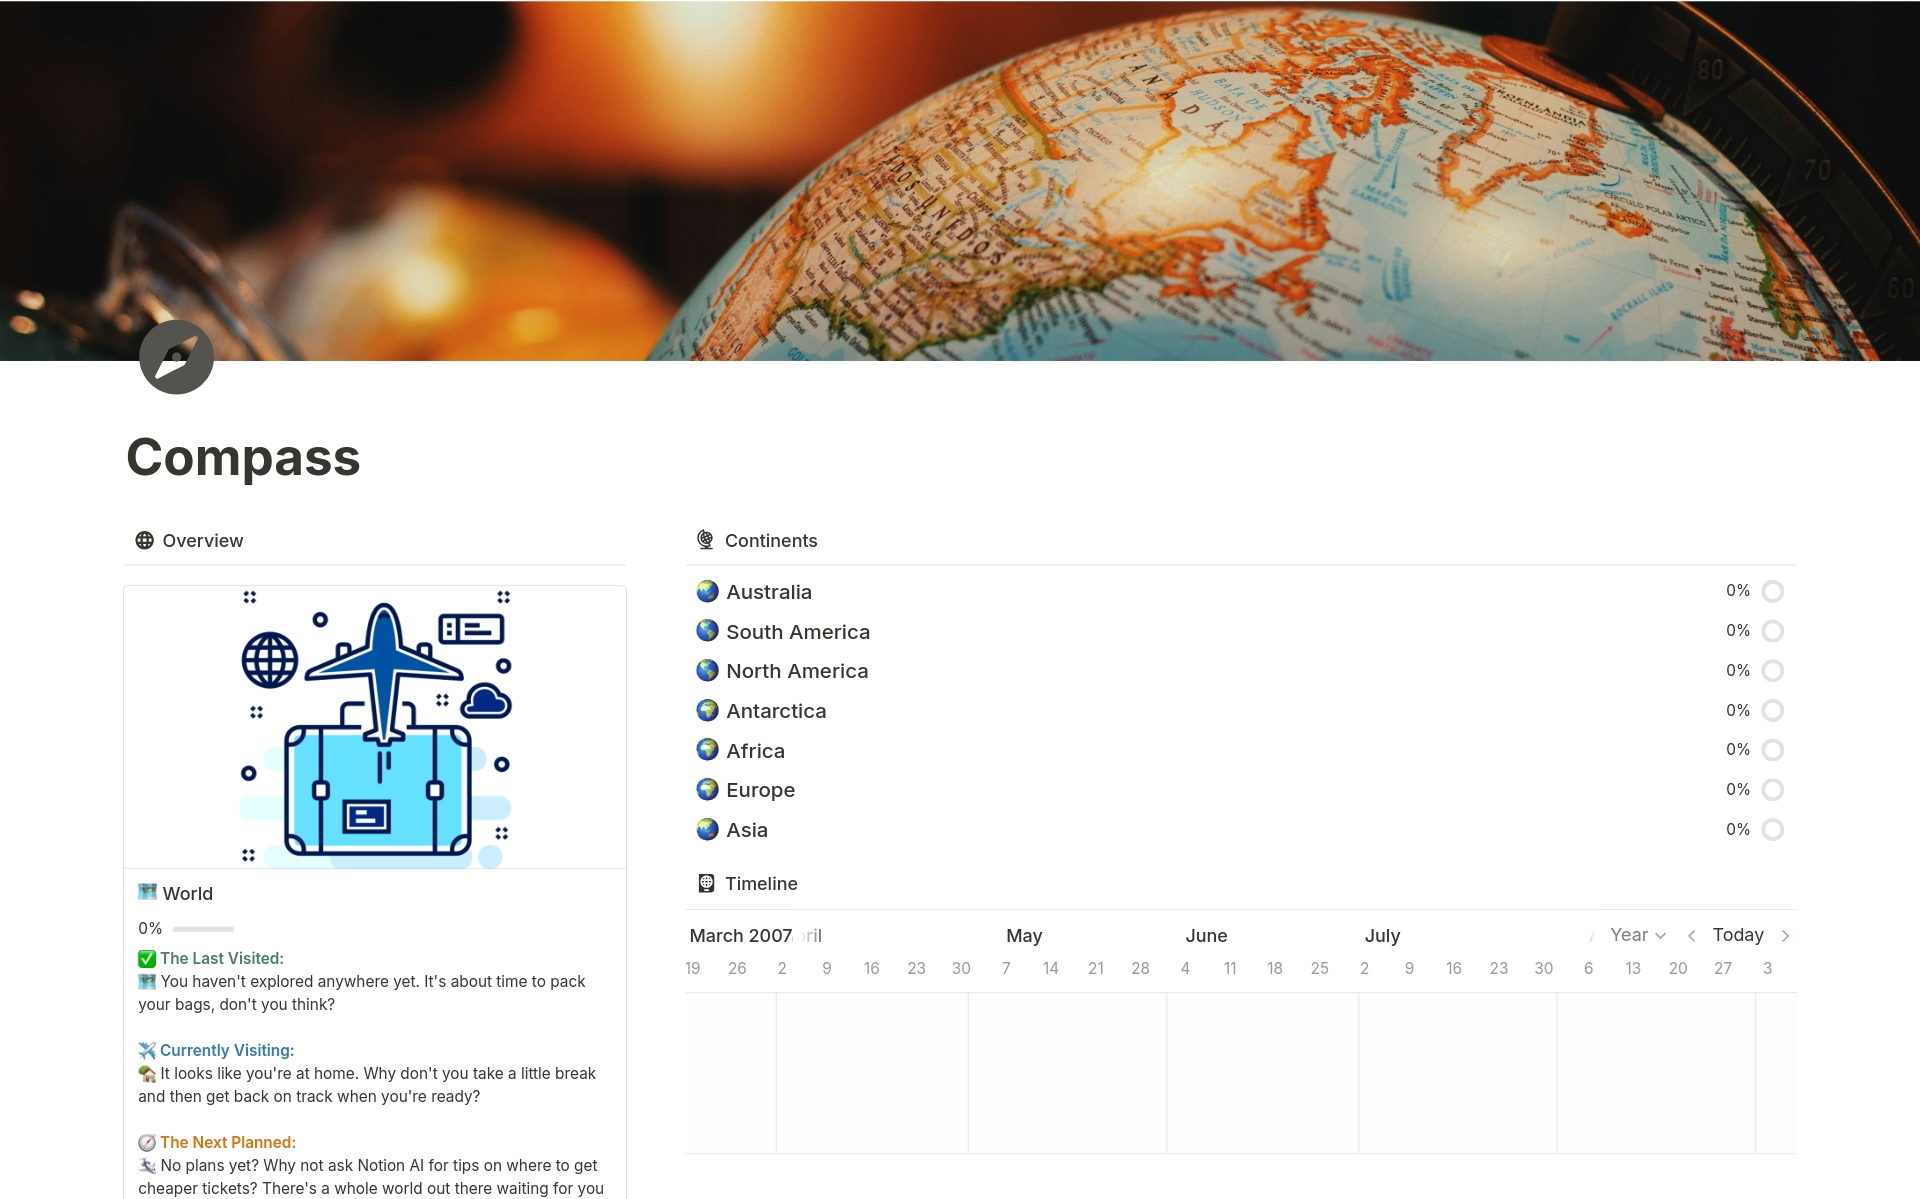 Explore the world and track your travels across continents!